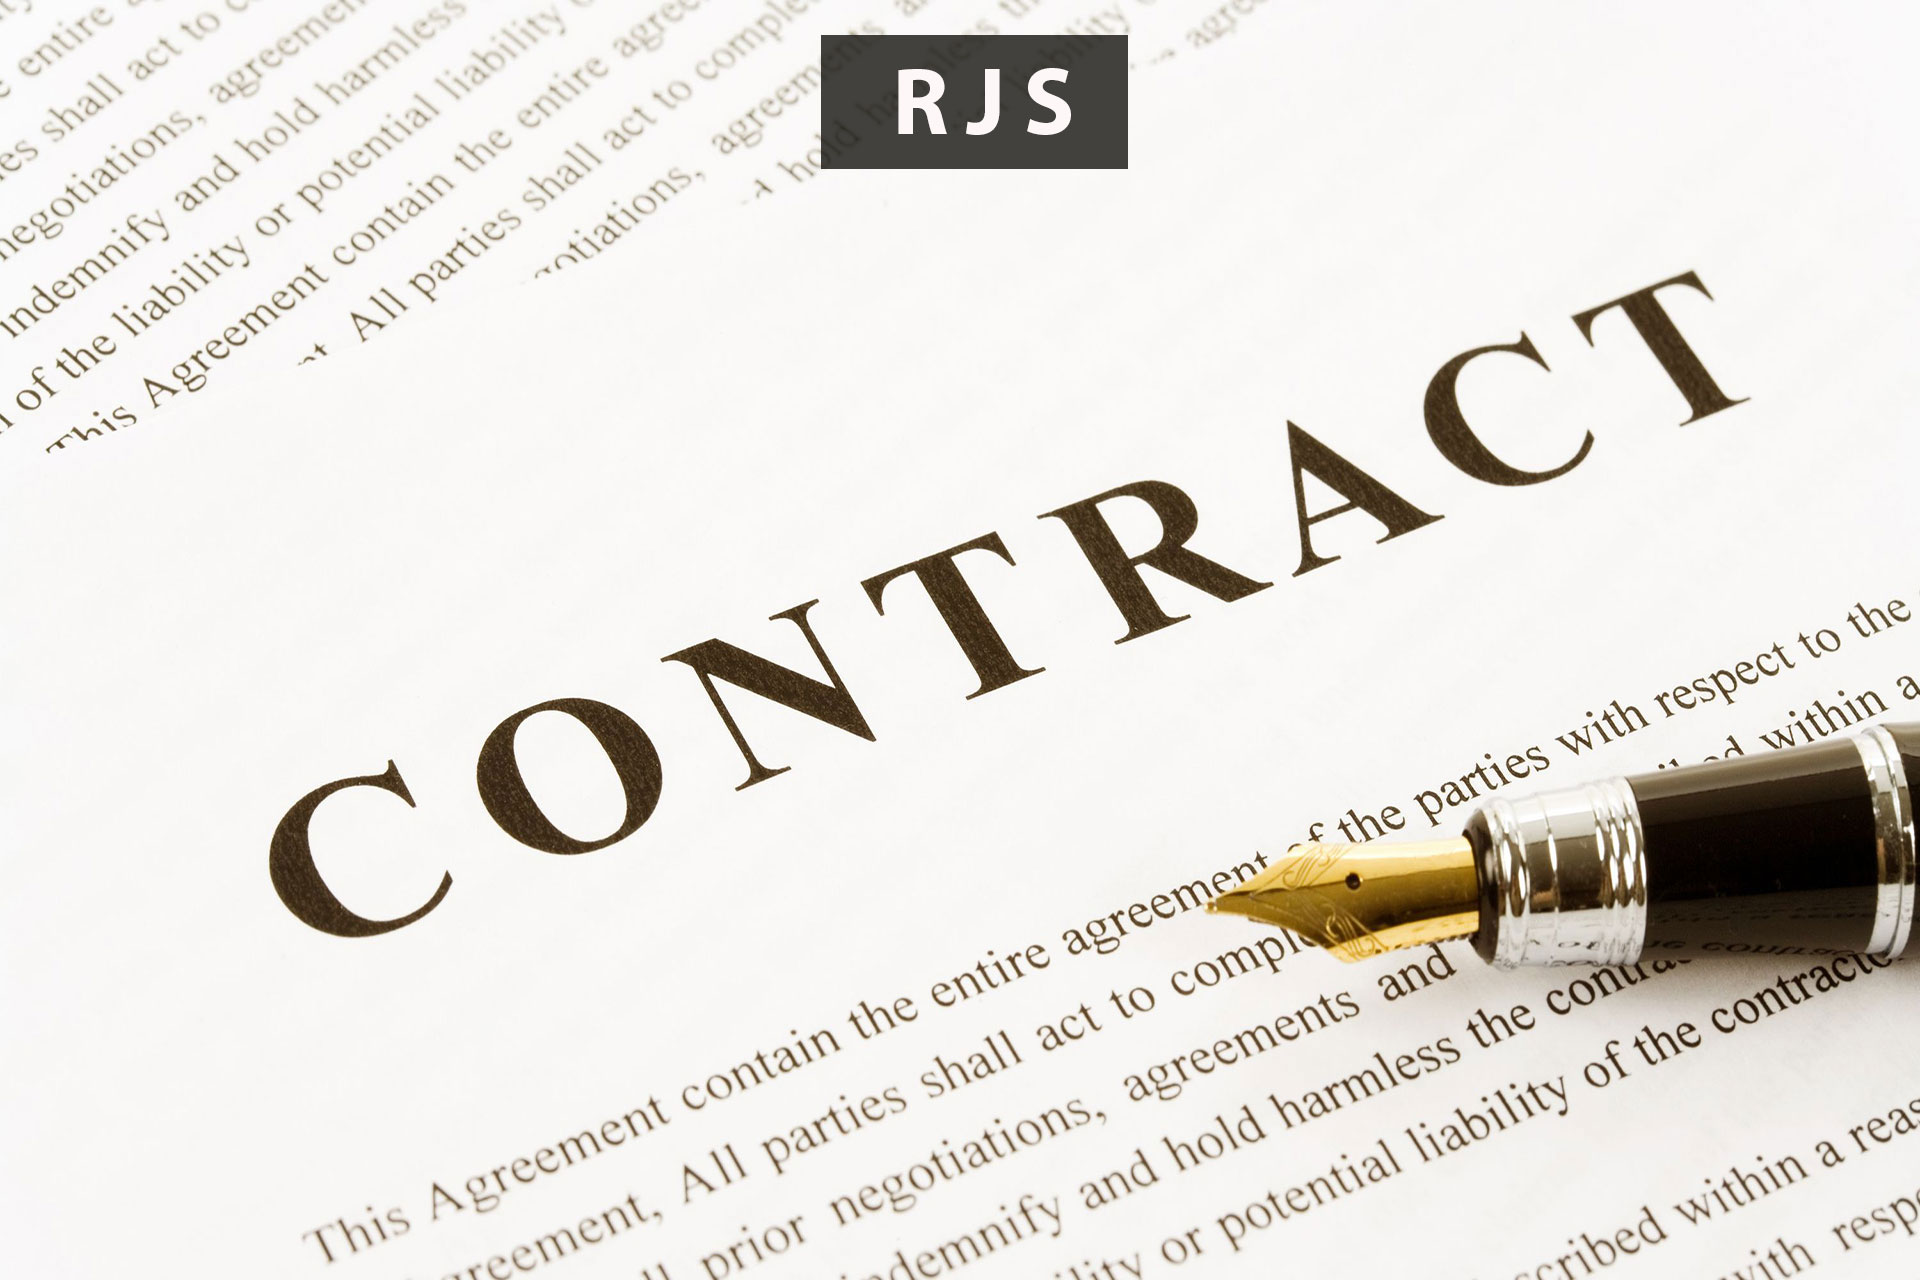 Contract Act – RJS